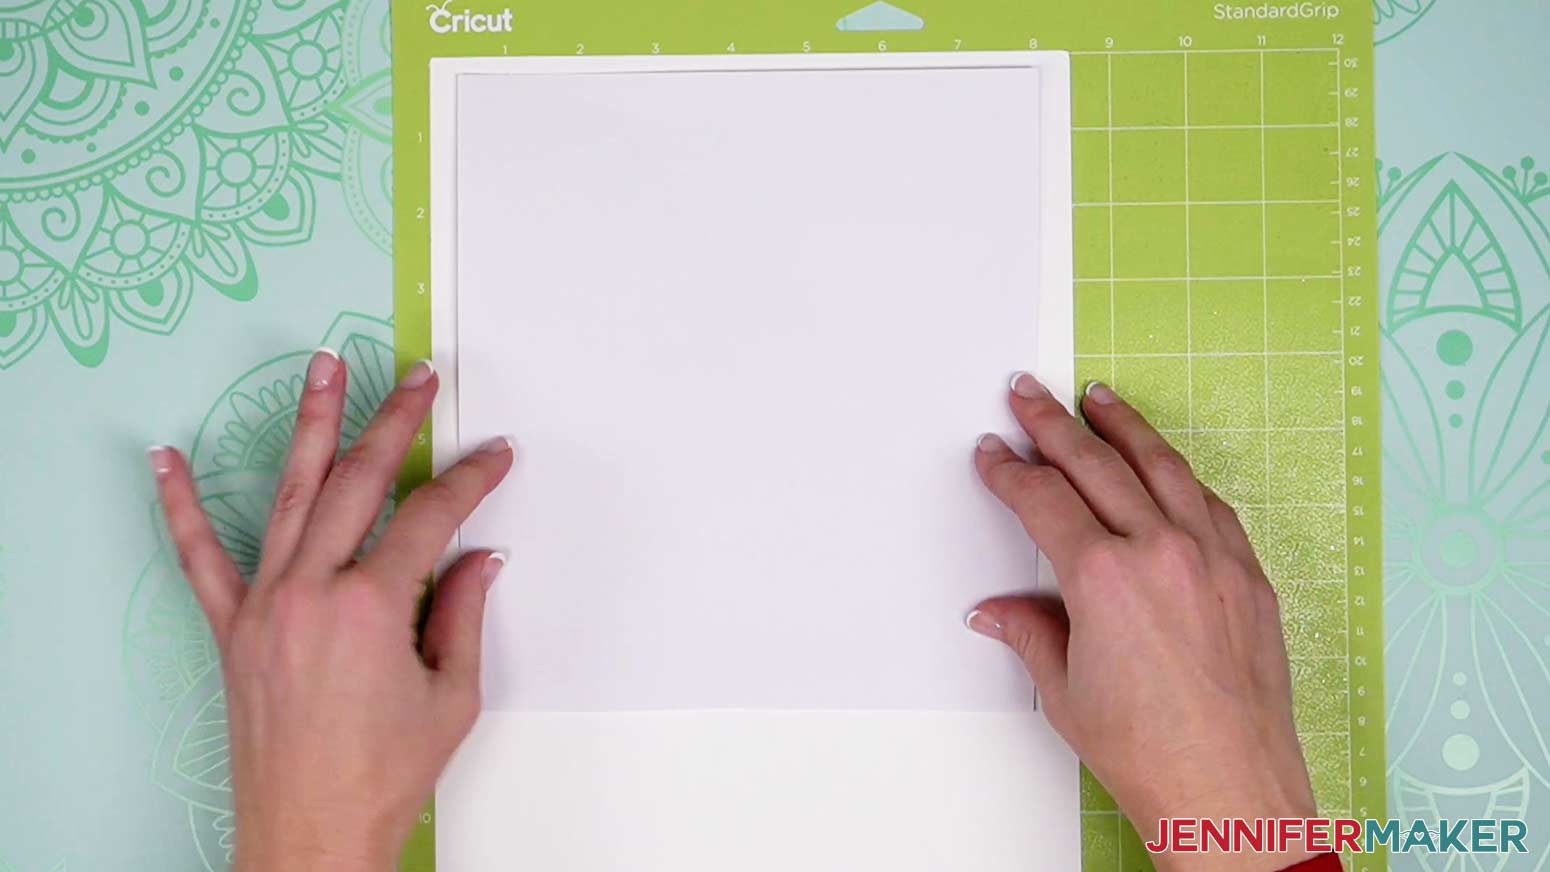 Cut a piece of adhesive paper large enough to cover the entire printed area.